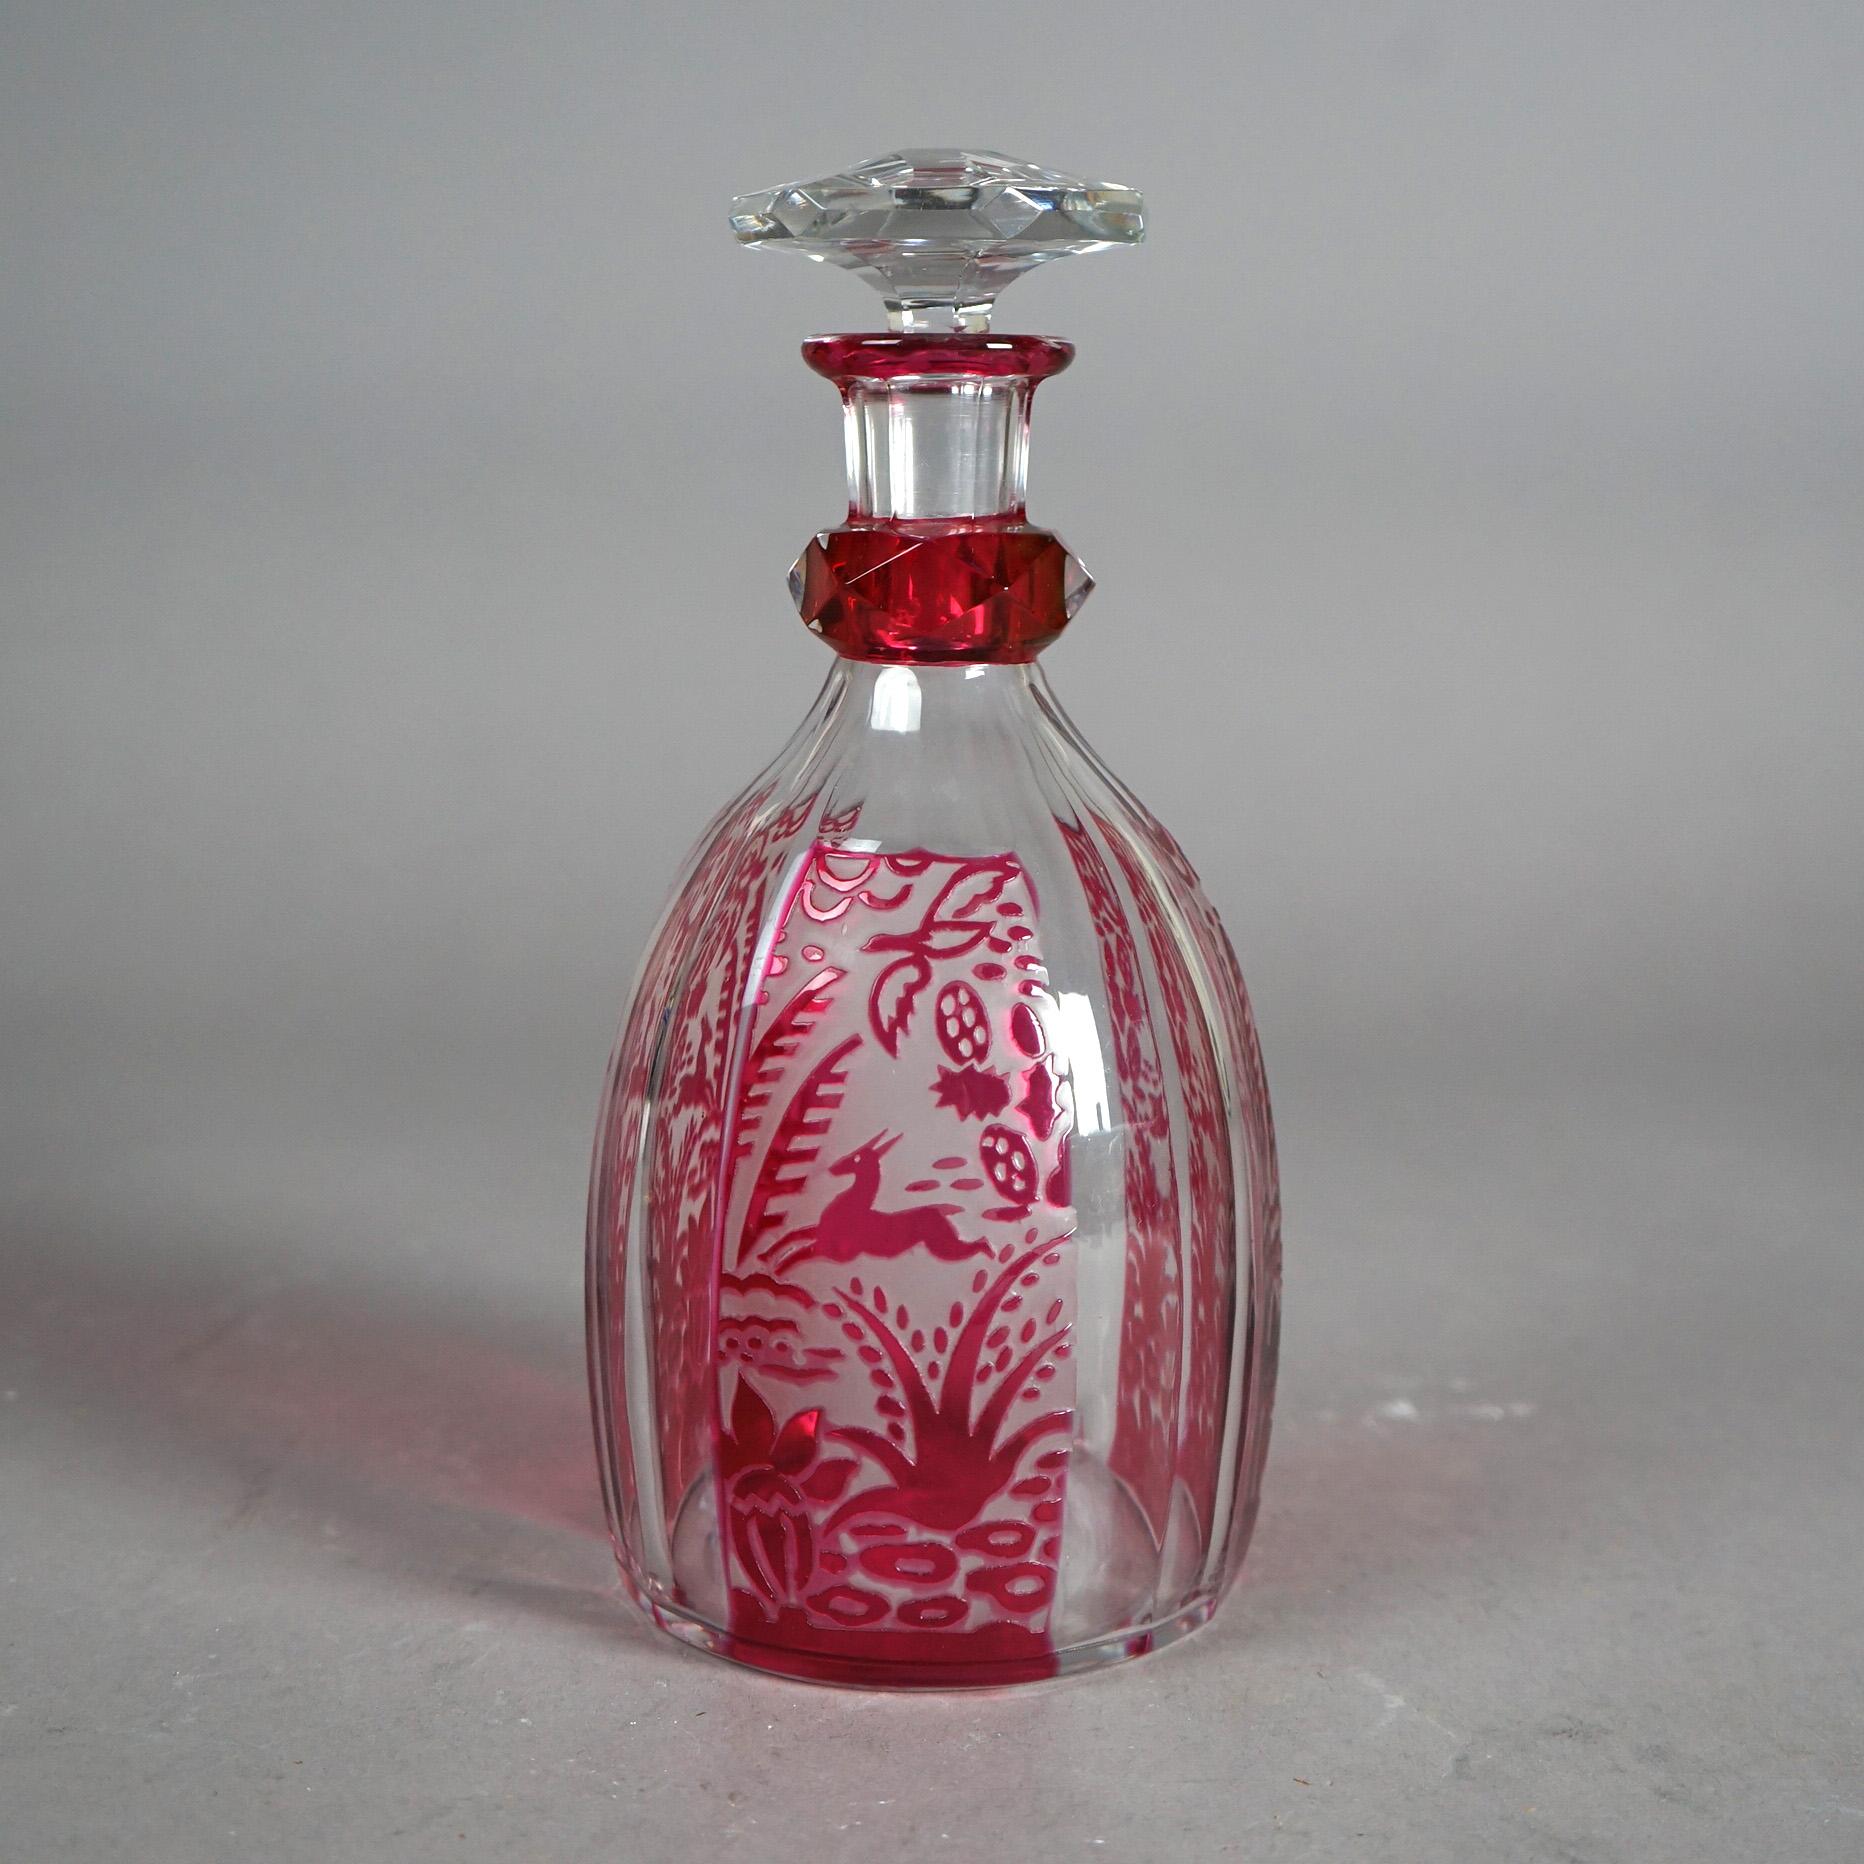 An antique French Daum Nancy decanter offers cranberry cut to clear art glass construction with leaping deep in forest setting, signed as photographed, c1920

Measures - 10